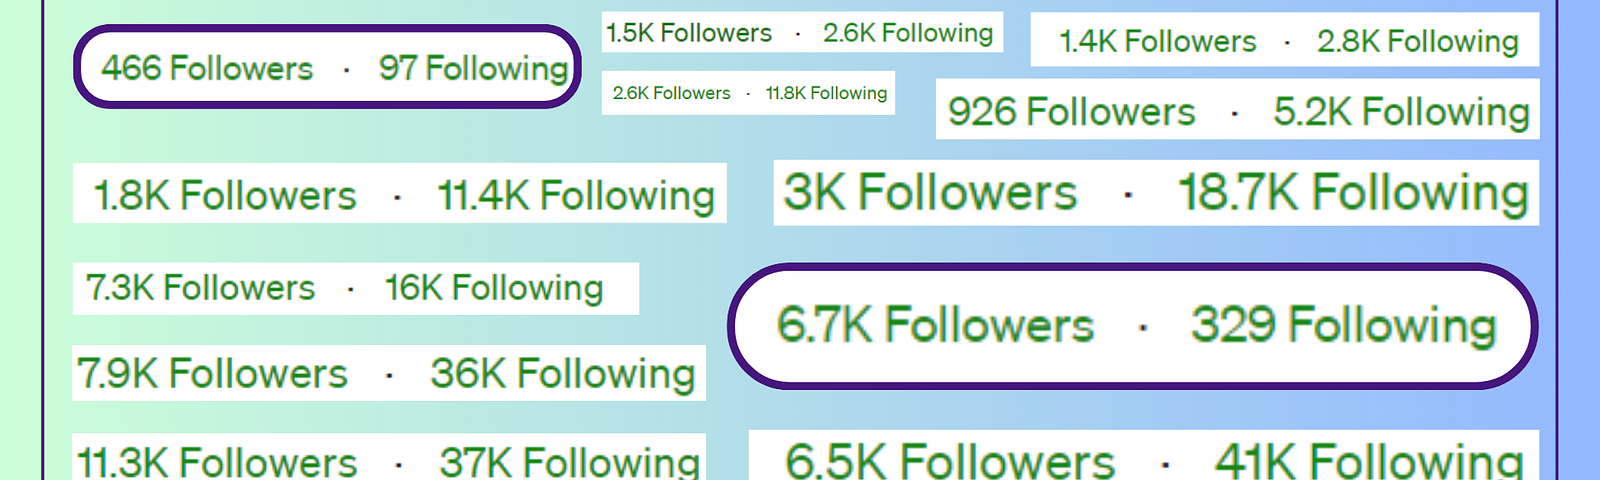 The image shows numerous screenshots of the figures for the number of followers and the number of authors followed by random accounts on Medium. A majority of people have much fewer followers than the number of people they follow themselves. There are only two screenshots, highlighted with a darker border, where the number of followers is significantly higher than the number of people followed.